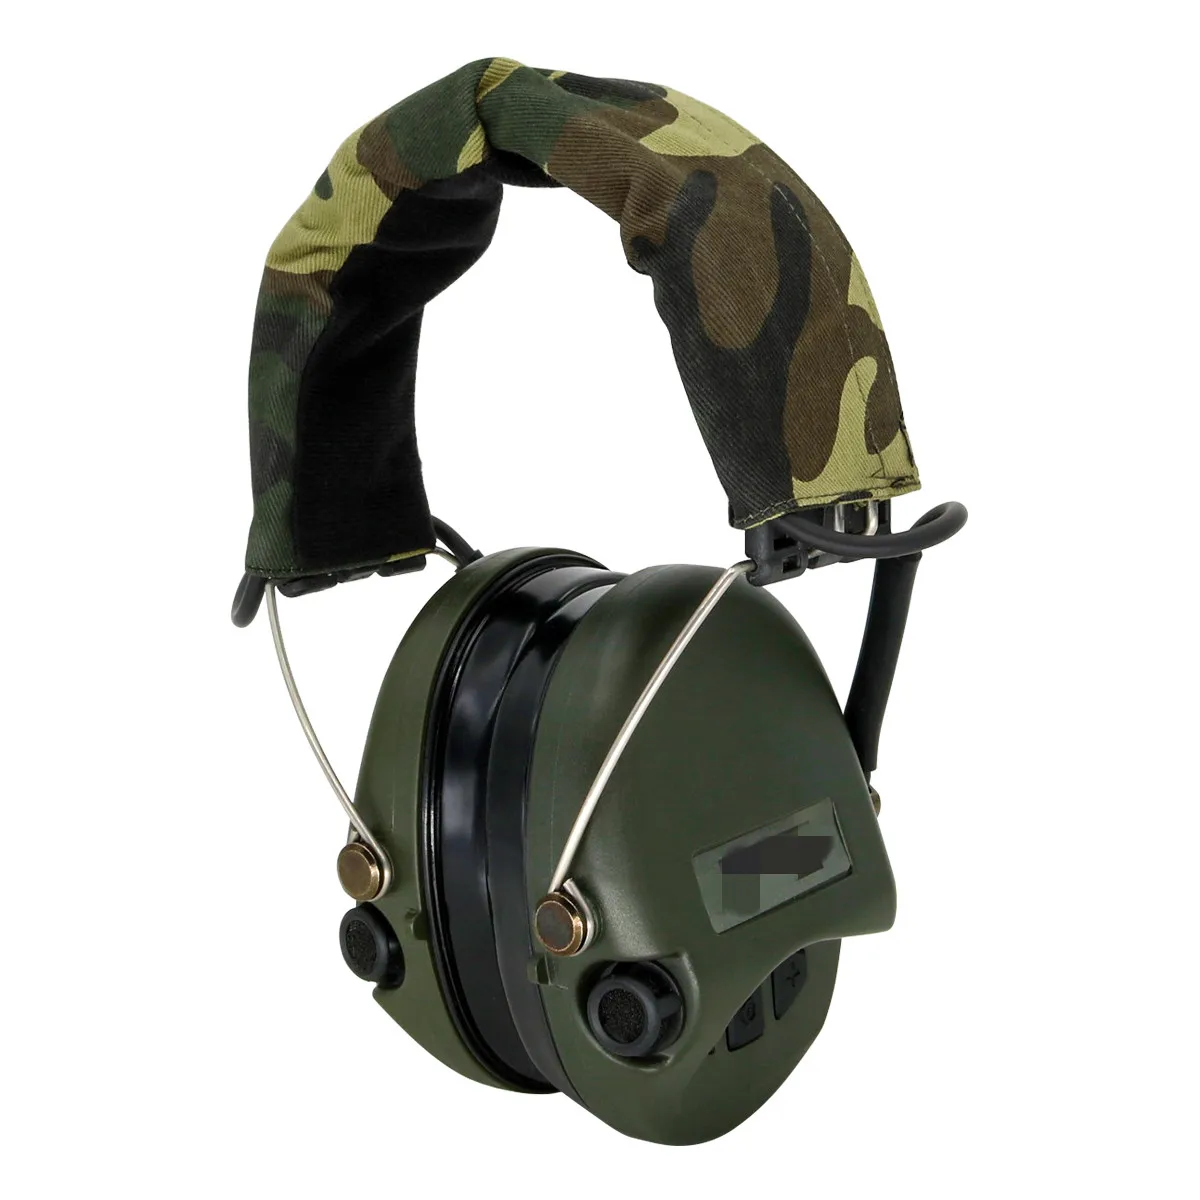 Tactical Airsoft MSASORDIN Headset No Communication Electronic Protective Earmuff Noise Reduction Shooting Tactical Headset enlarge